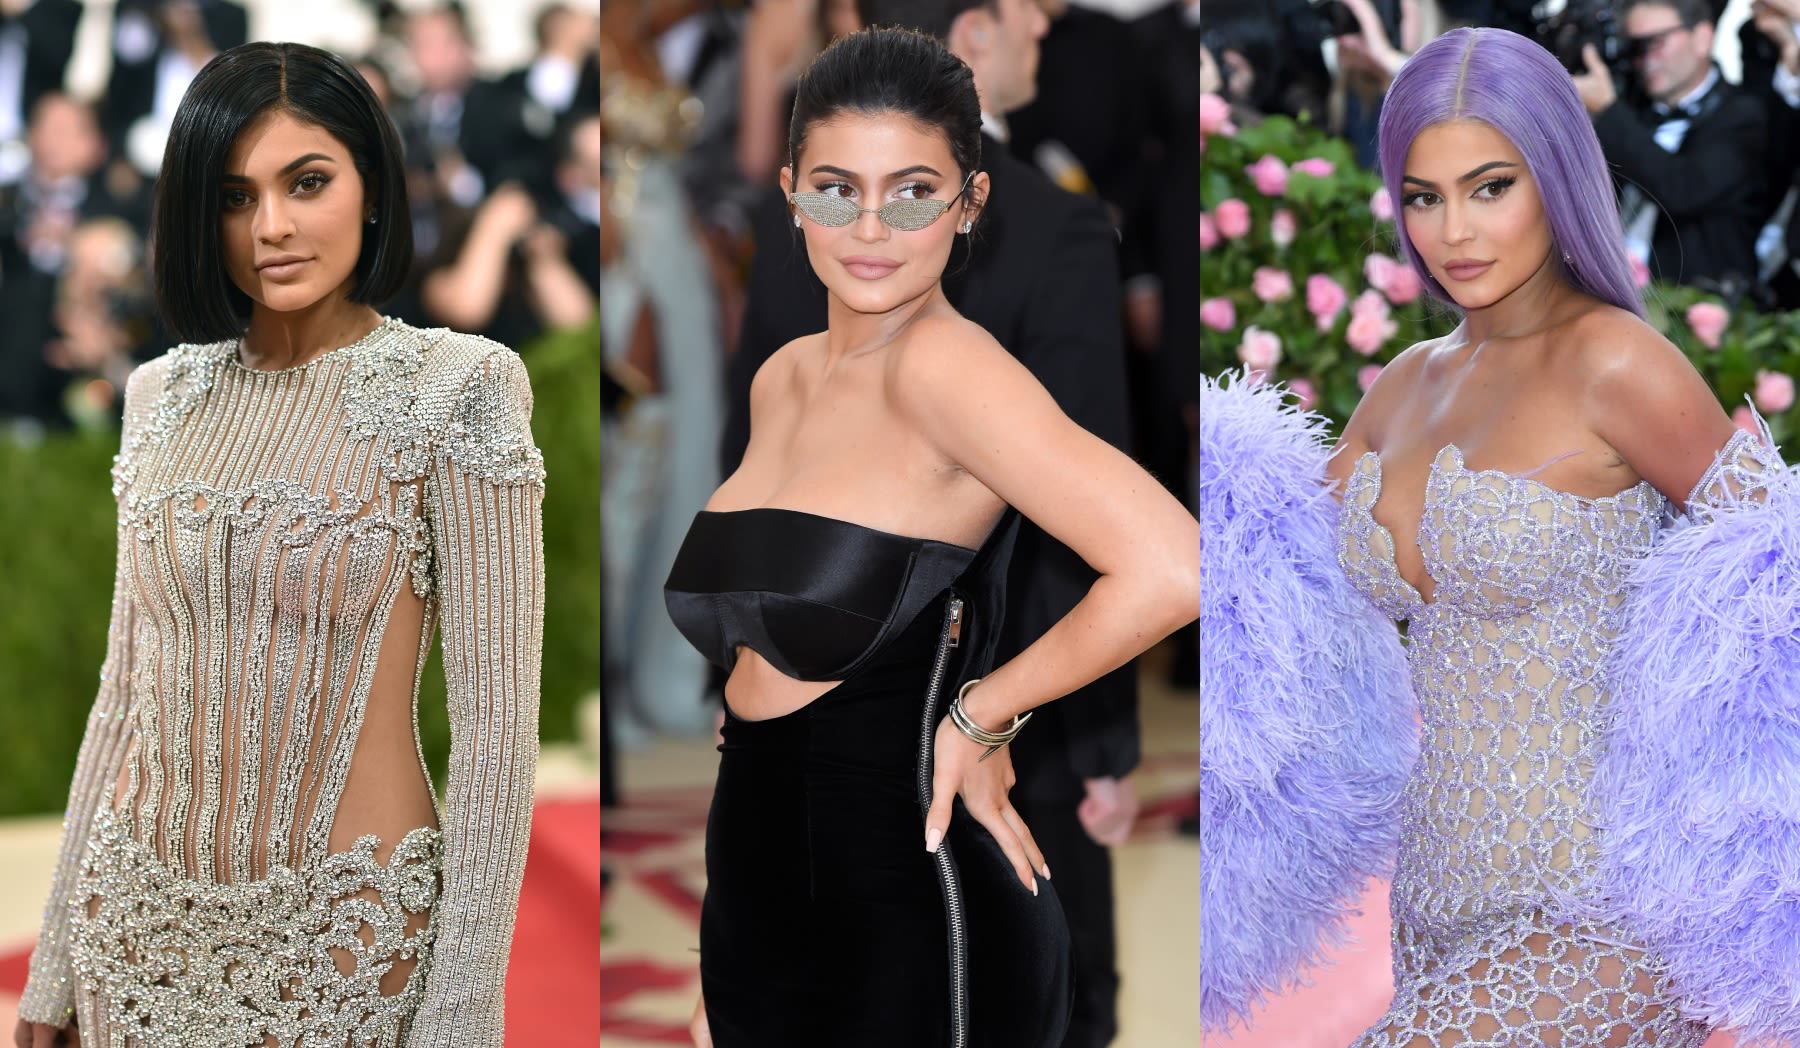 All of Kylie Jenner’s Met Gala Looks: Beaded in Versace, Bridal Inspiration and More Dresses Through the Years